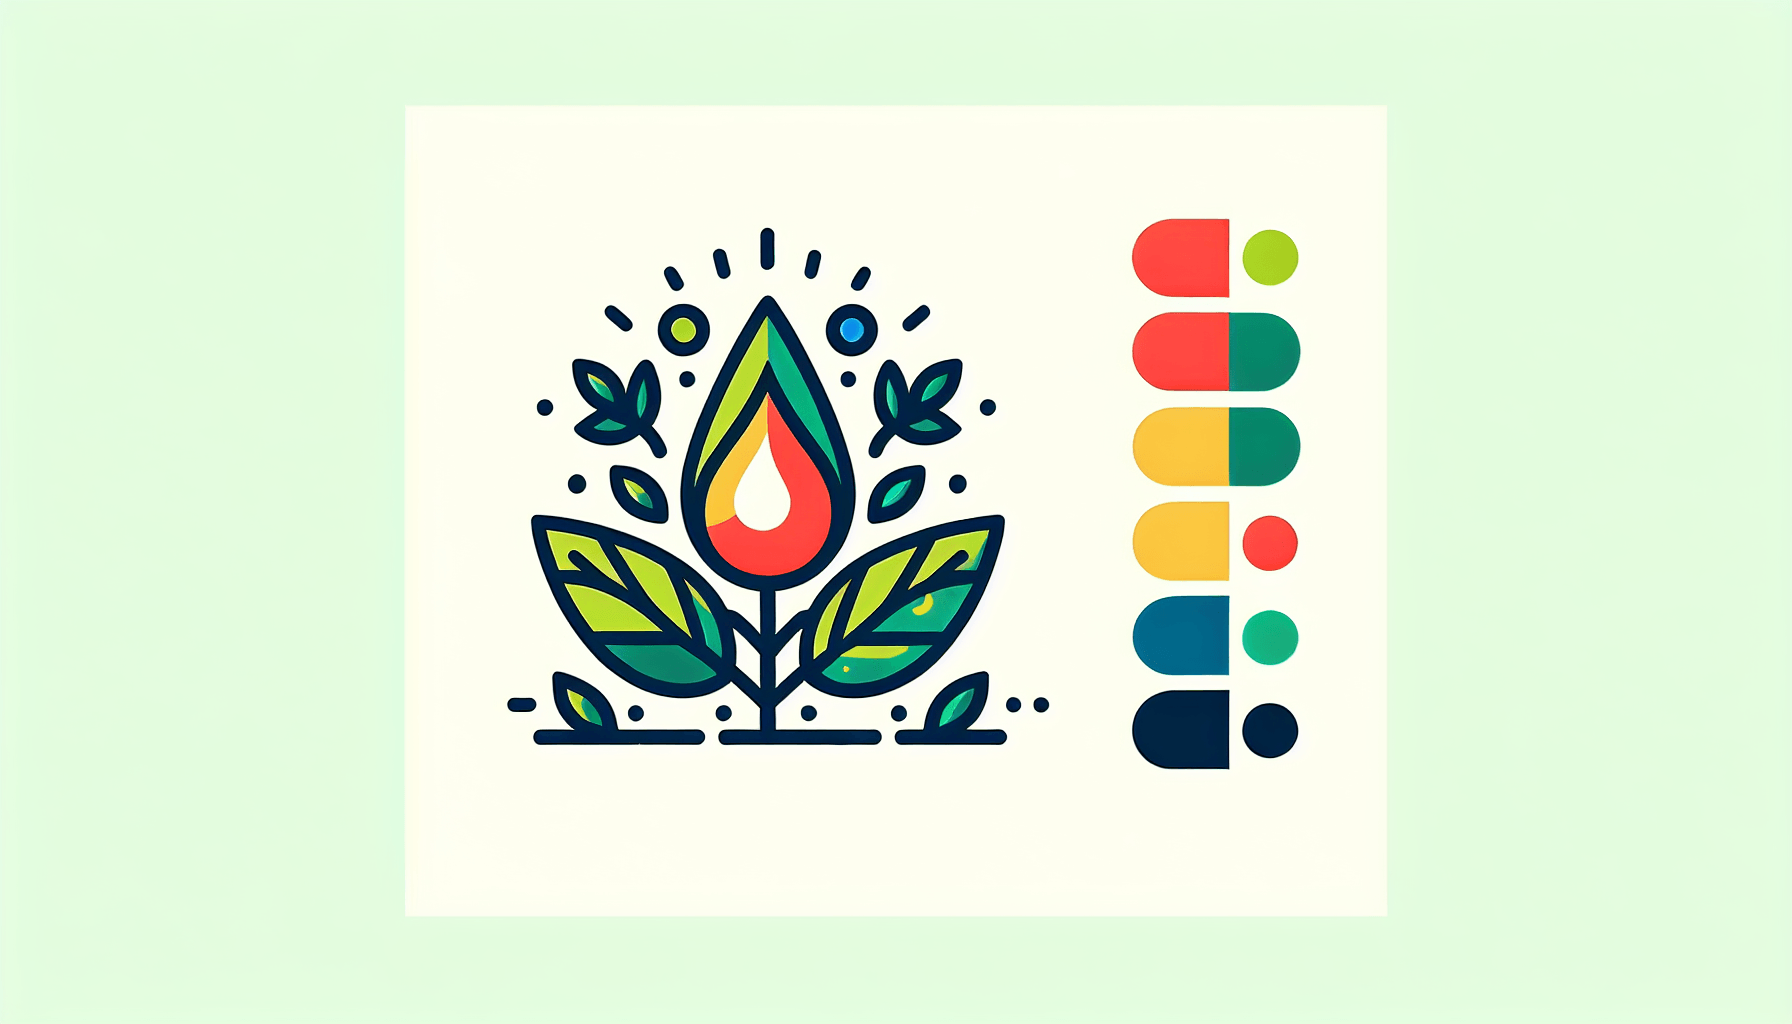 Seedling in flat illustration style and white background, red #f47574, green #88c7a8, yellow #fcc44b, and blue #645bc8 colors.